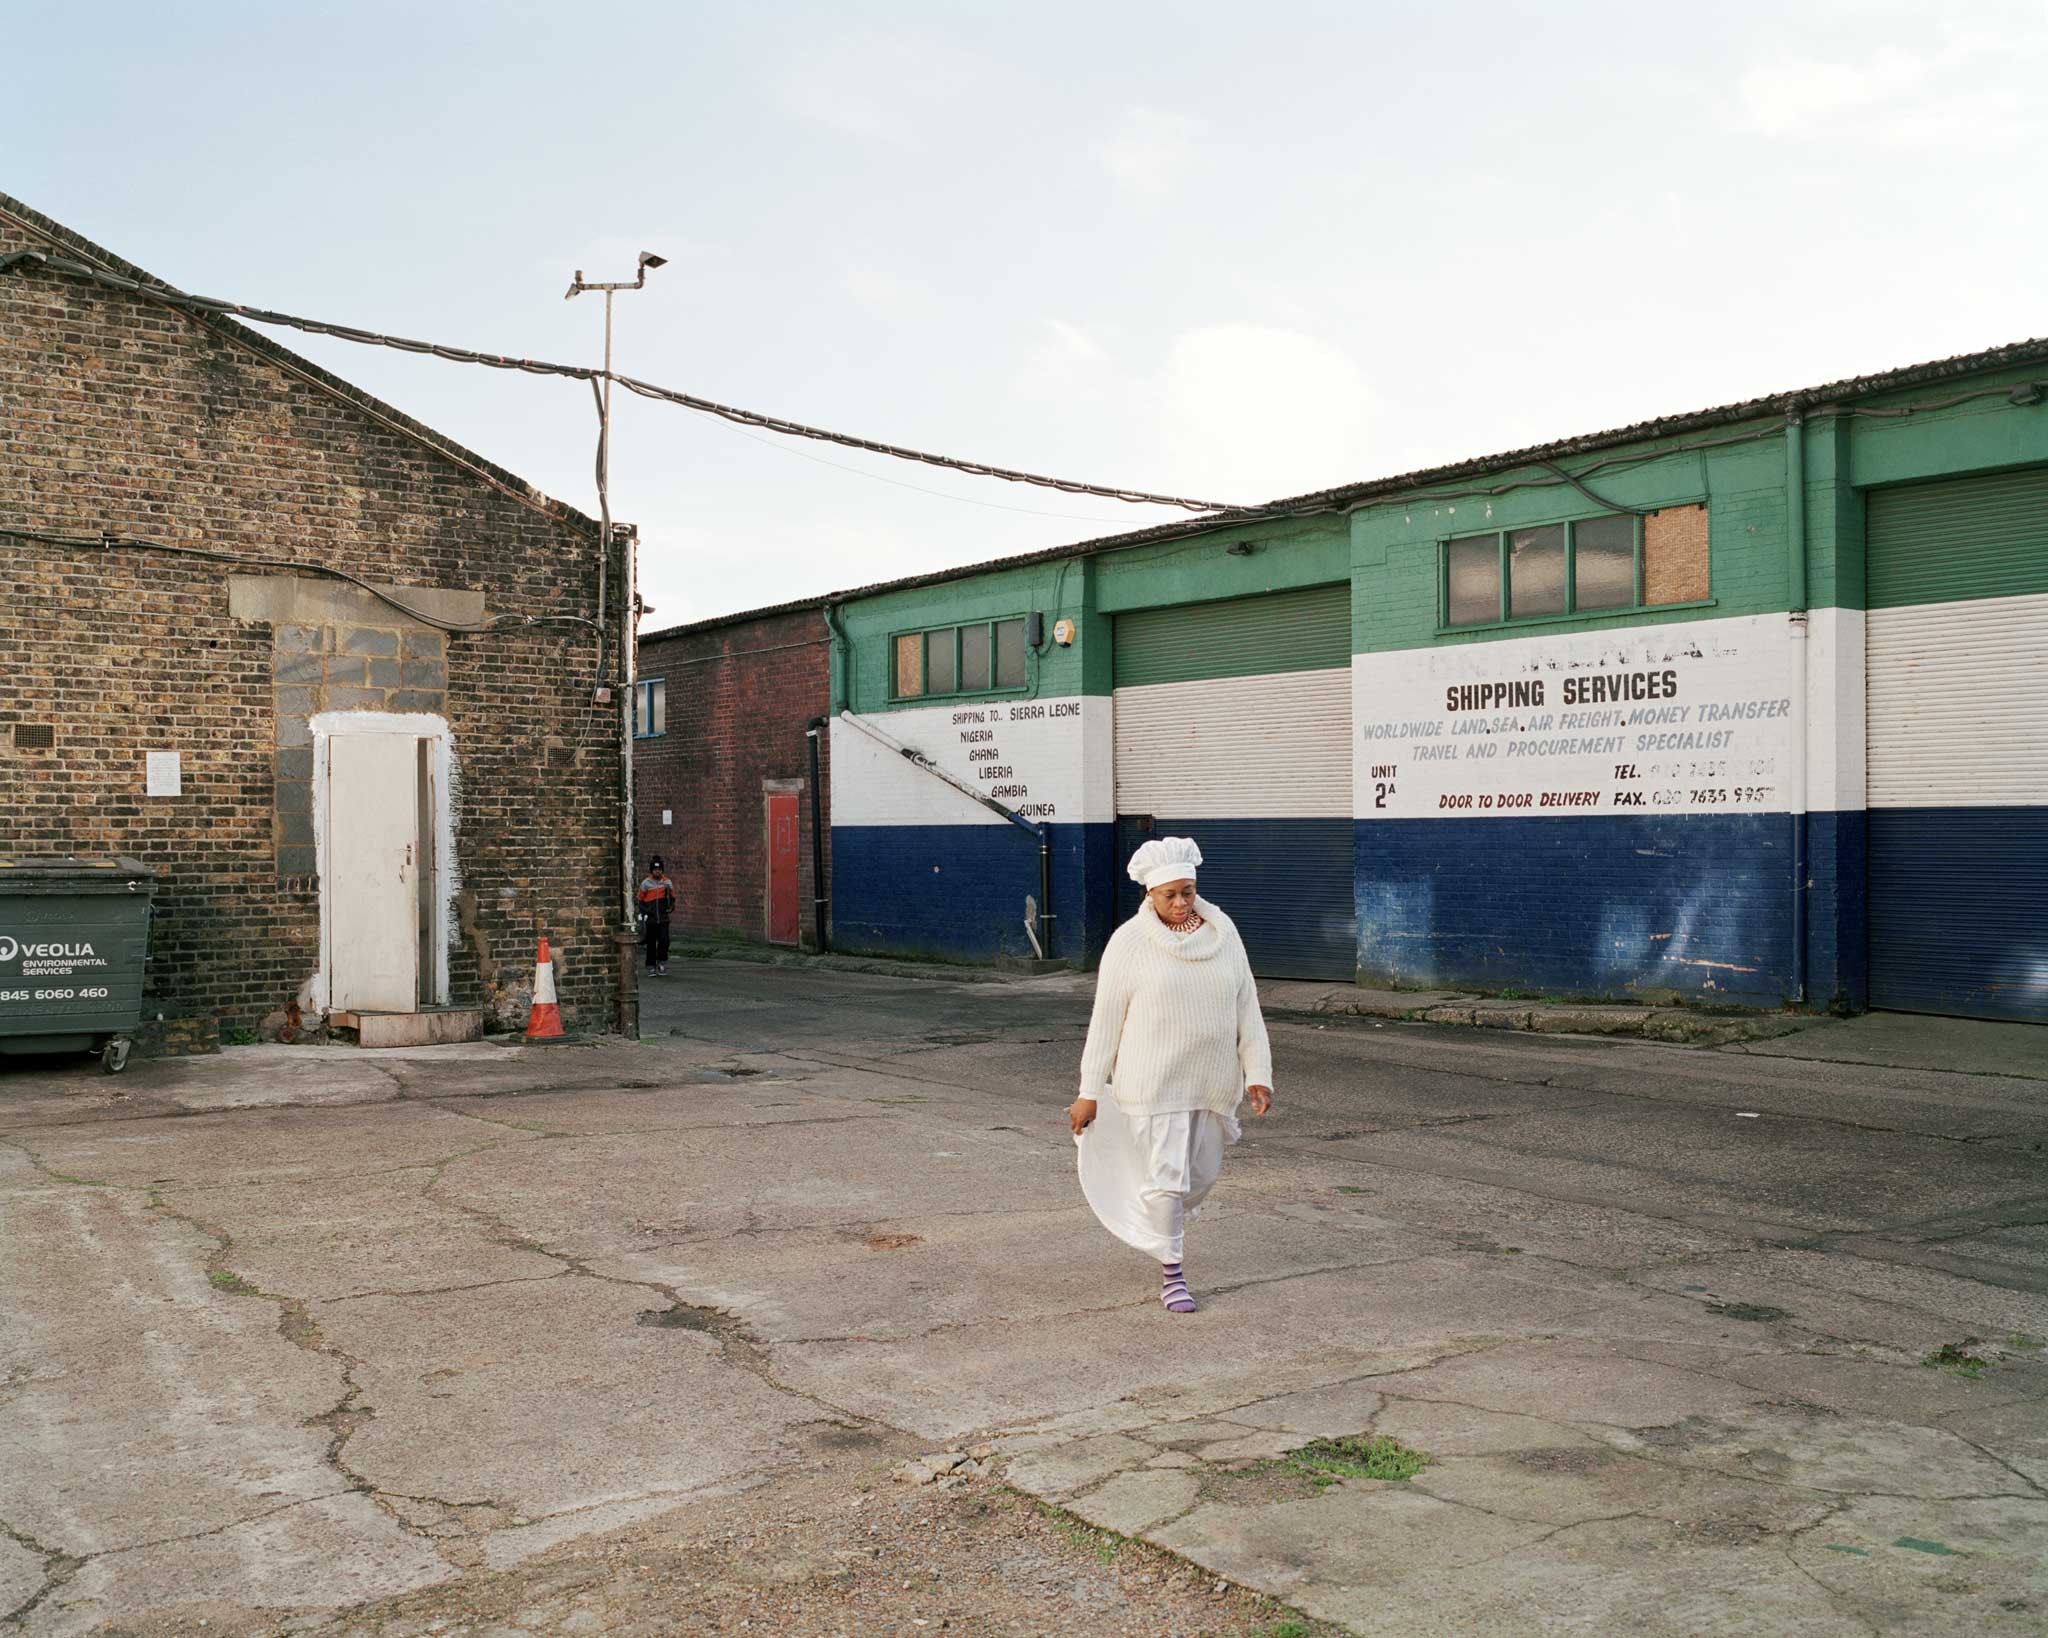 A woman walks to church through the Copeland Park Industrial Estate in Peckham. There are said to be 11 churches, within this one industrial estate.